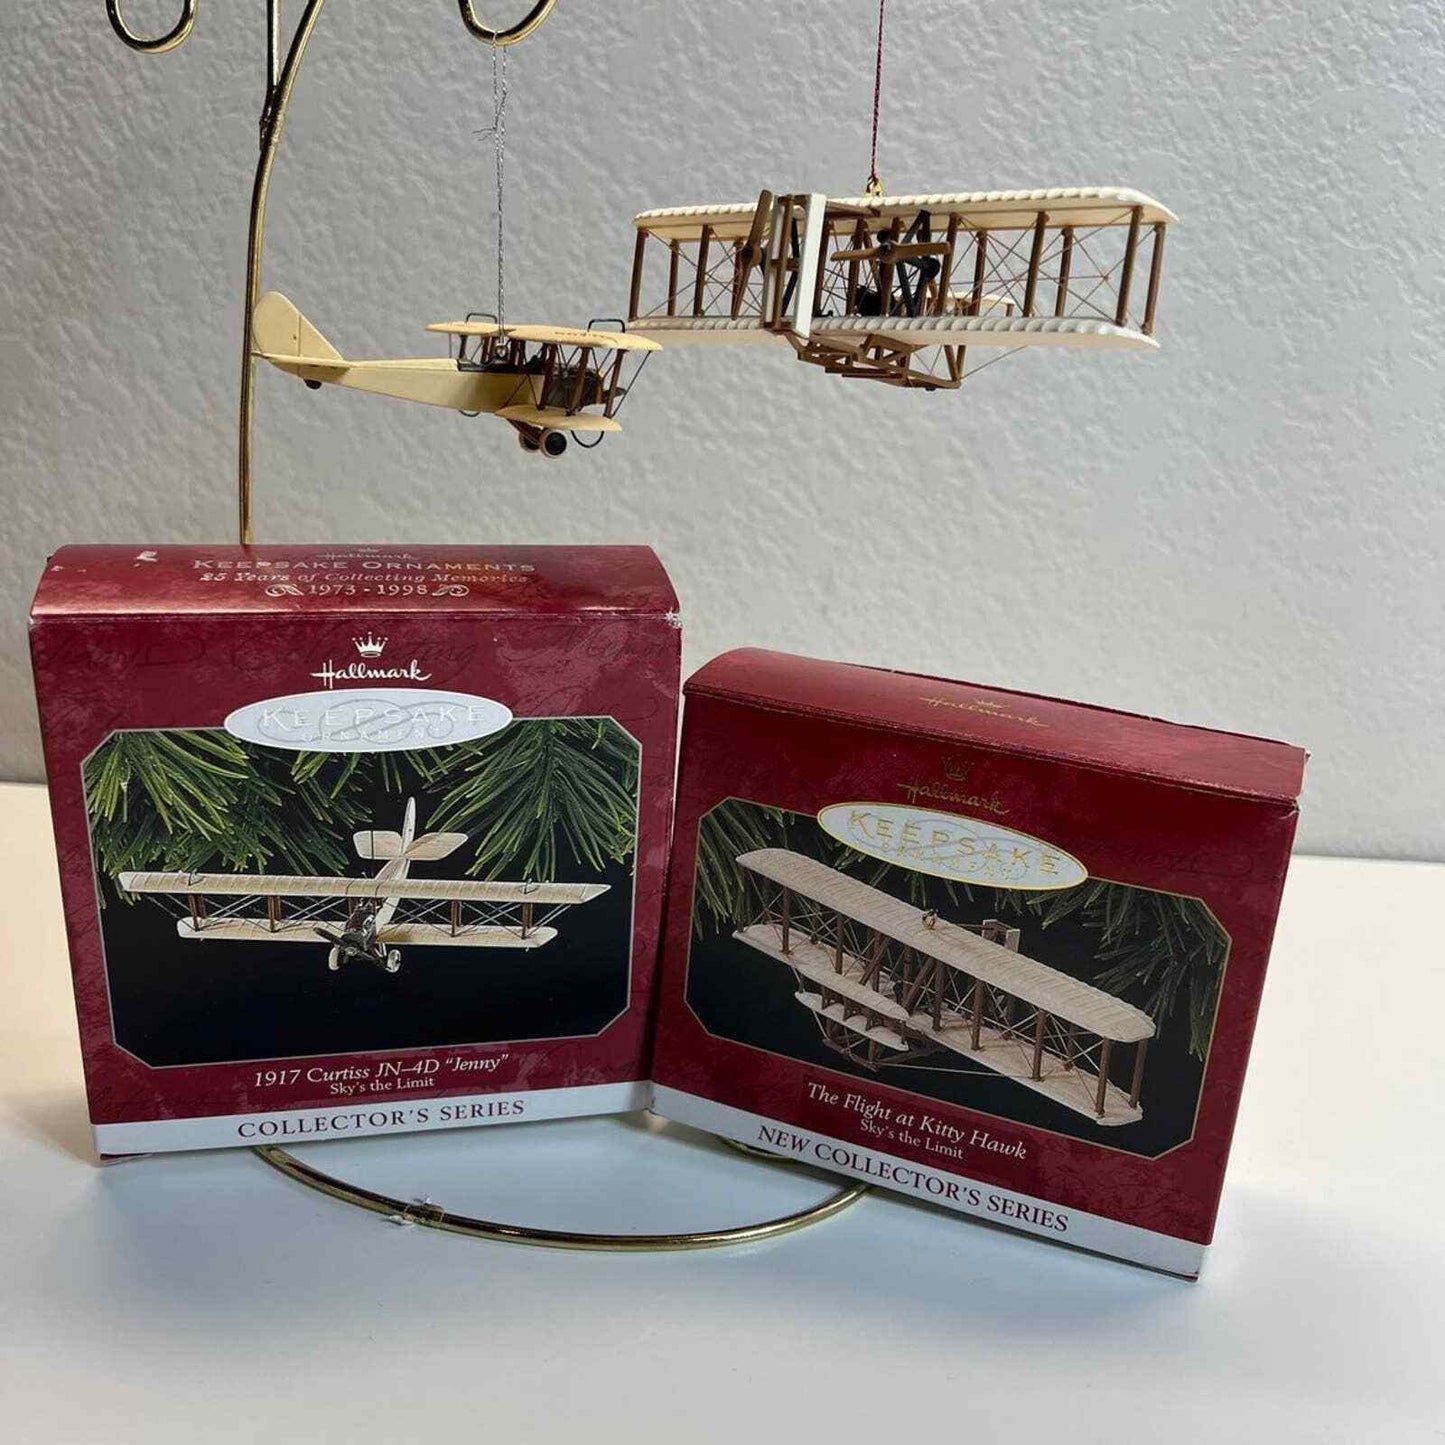 Hallmark Ornaments Airplanes Sky's the Limit Collectors Series Christmas Holiday